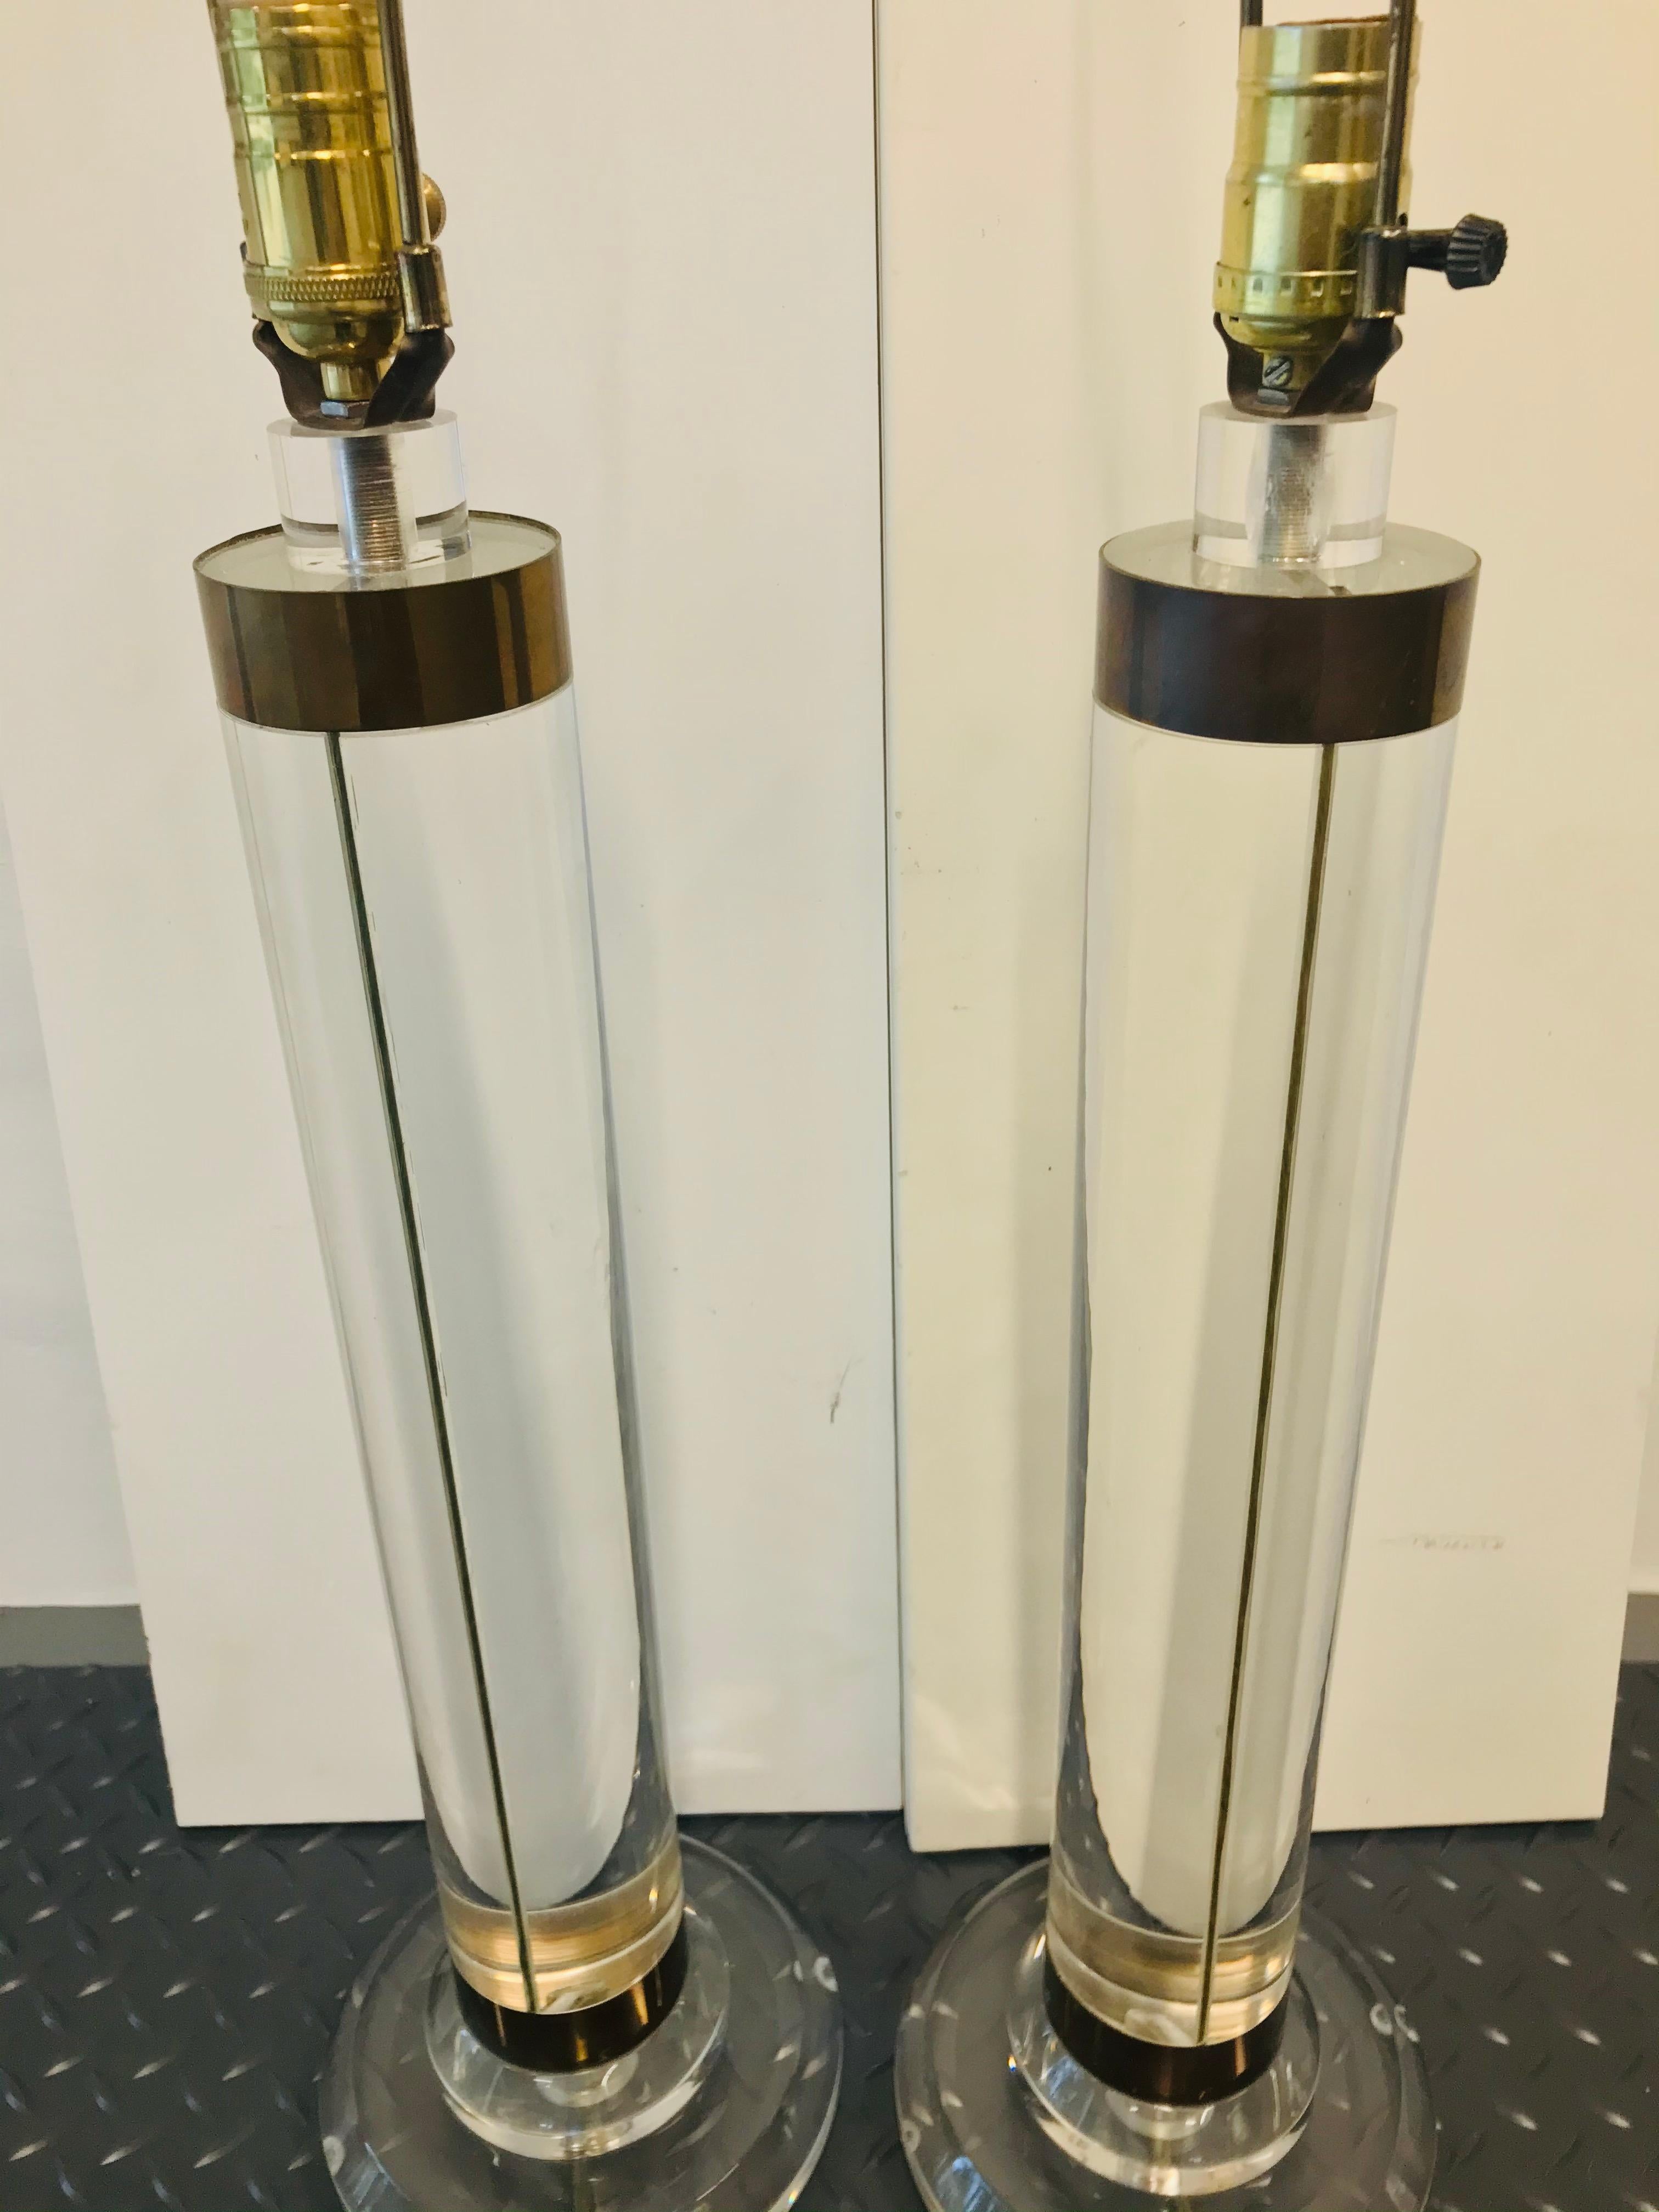 Gorgeous pair of clear Lucite cylinder table lamps with polished brass banding. Designed by Karl Springer in the 1980s. 
These lamps stand 33